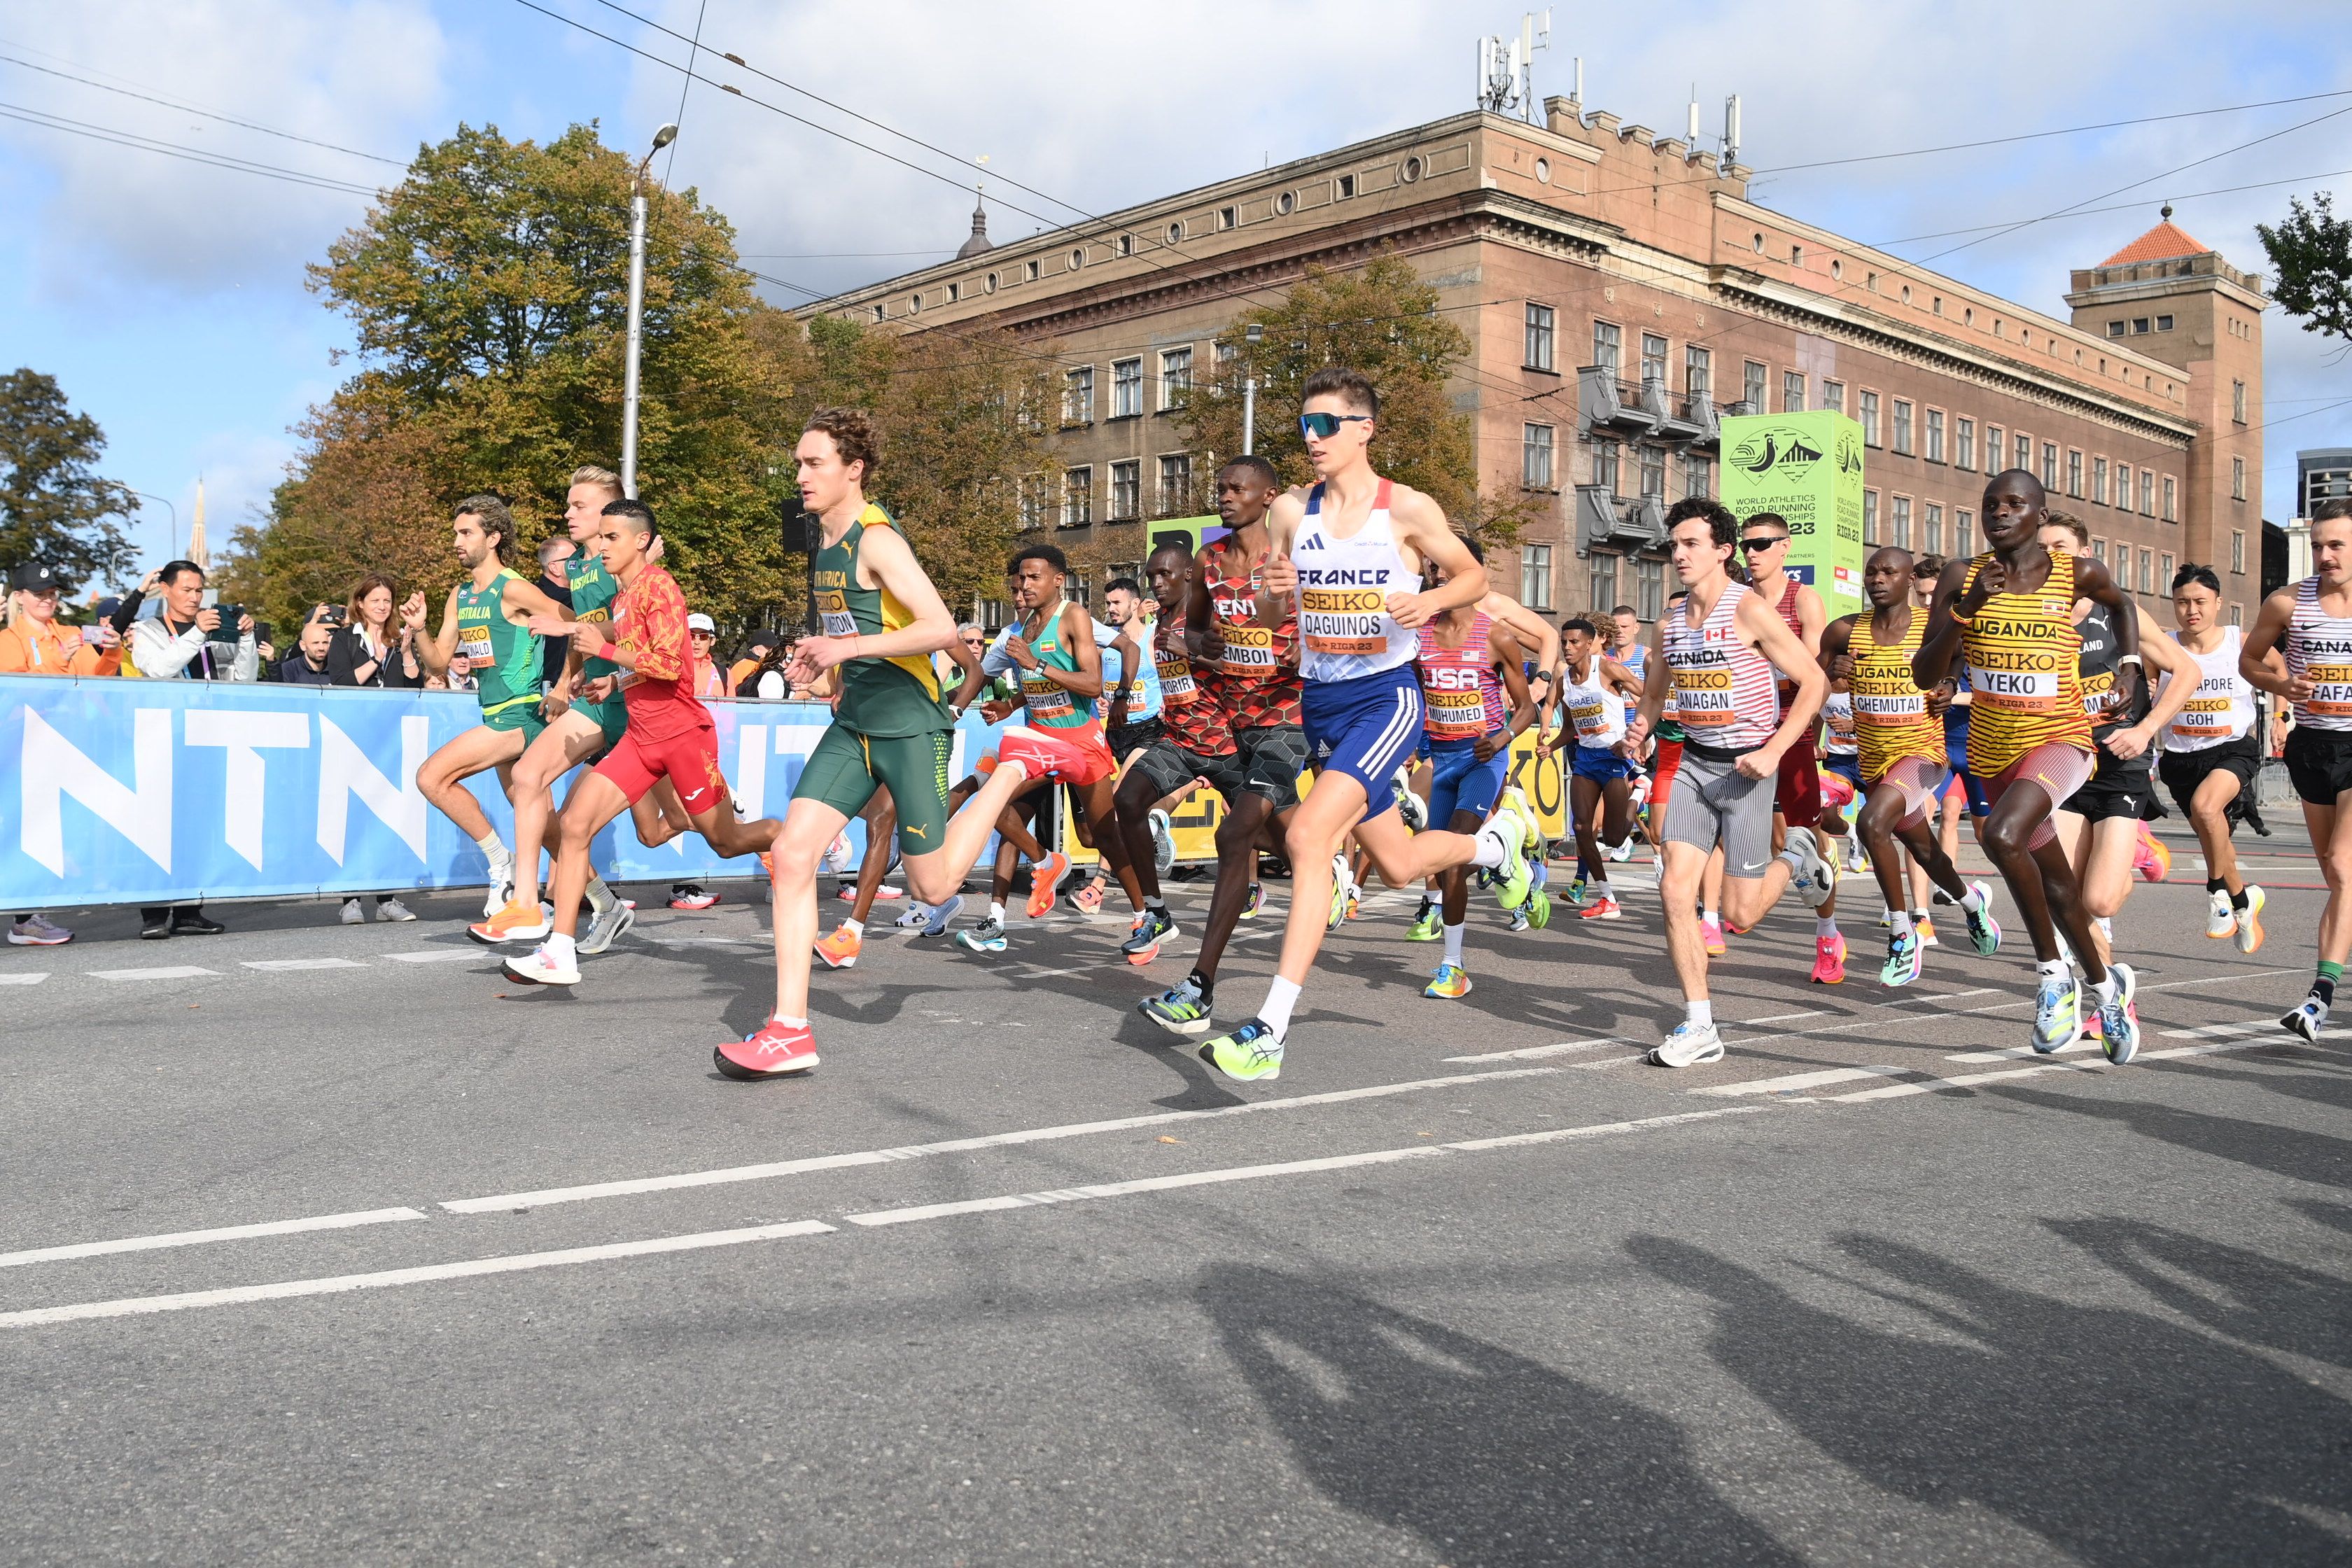 The start of the men's 5km at the World Athletics Road Running Championships Riga 23